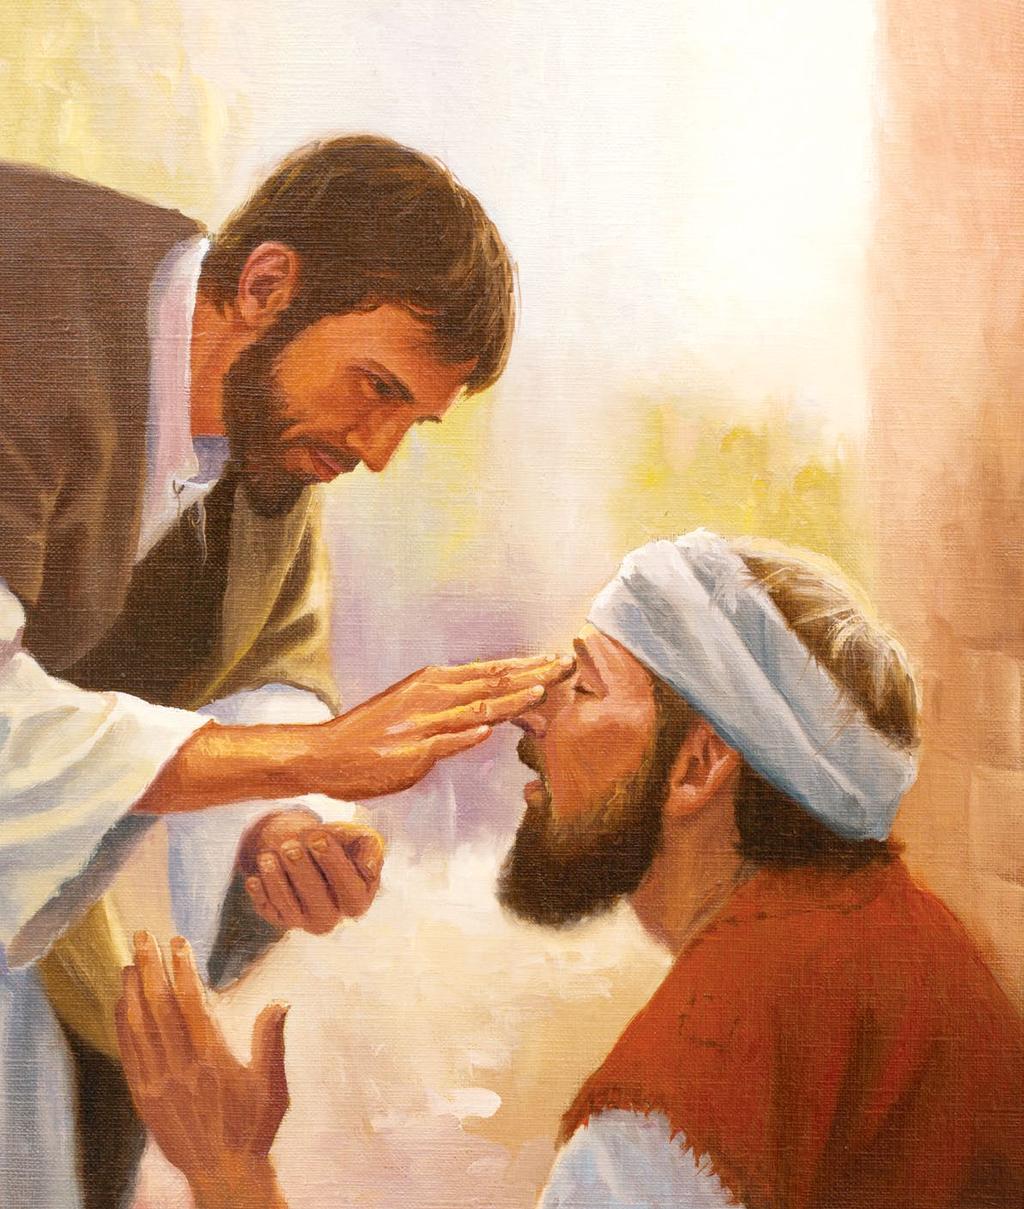 The Pharisees Get Angry John 9:1-35 Jesus and His disciples came to a blind man sitting beside the road on the Sabbath day. The blind man was a beggar.